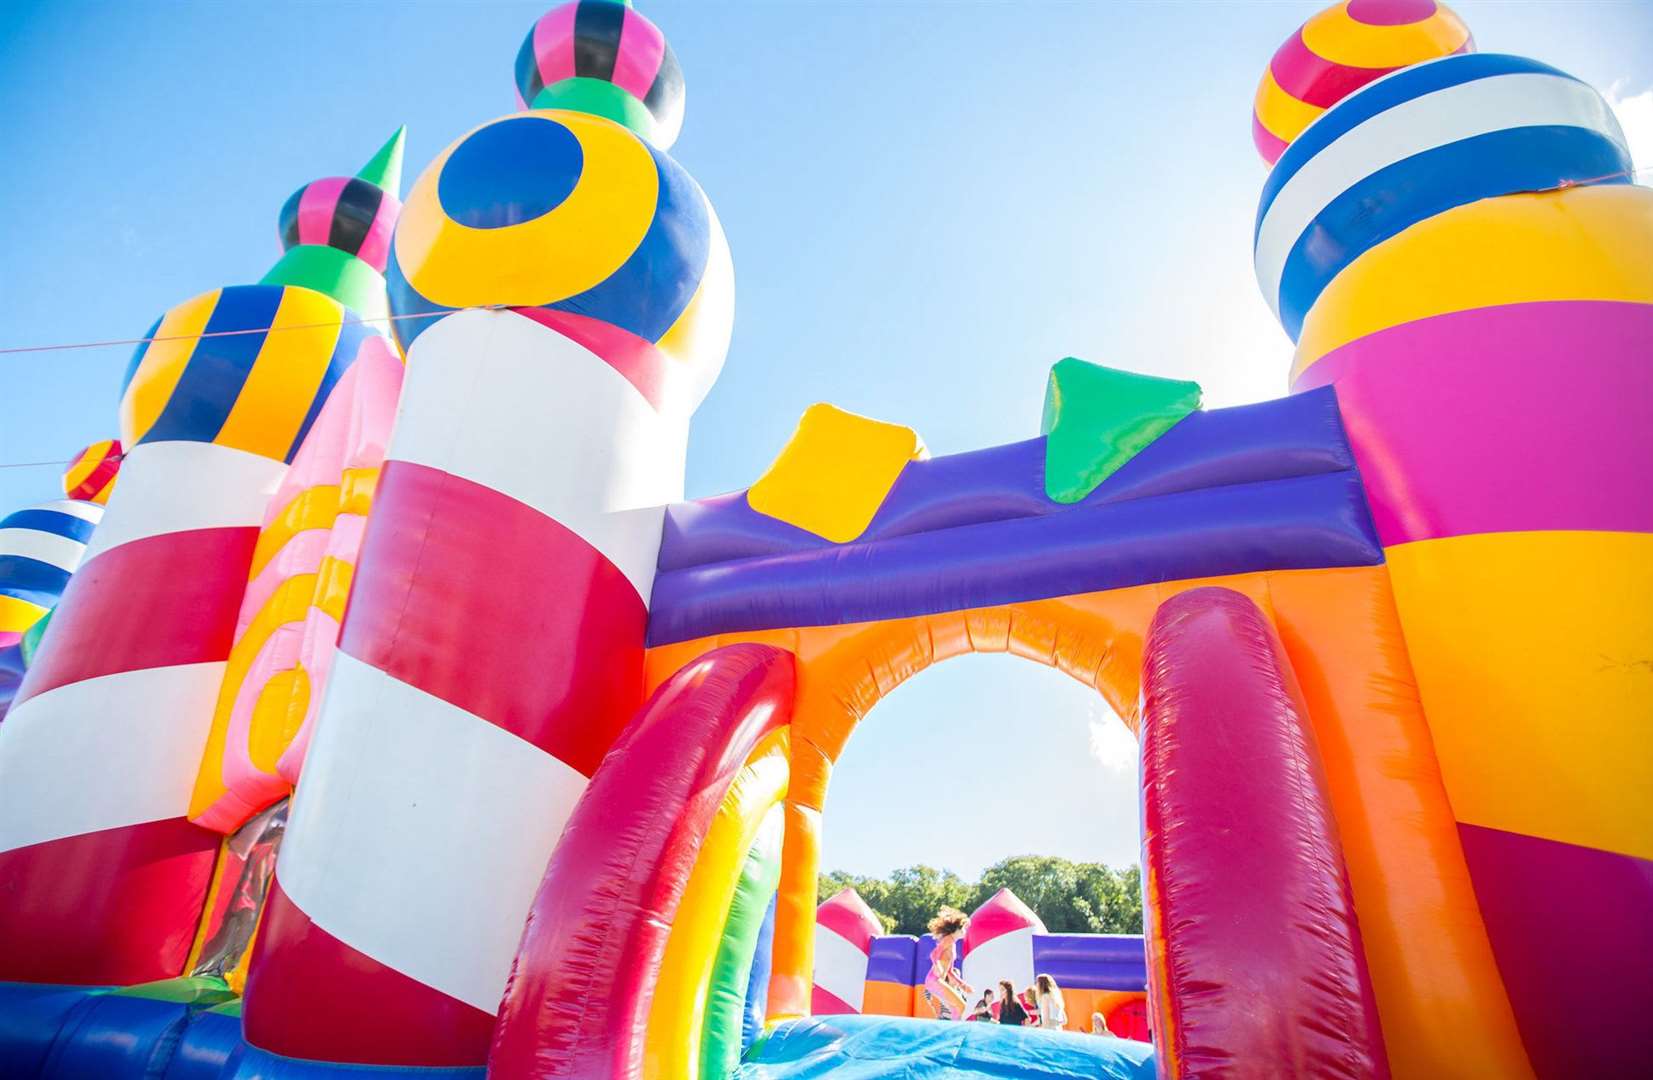 The world's biggest bouncy castle is returning to Dreamland